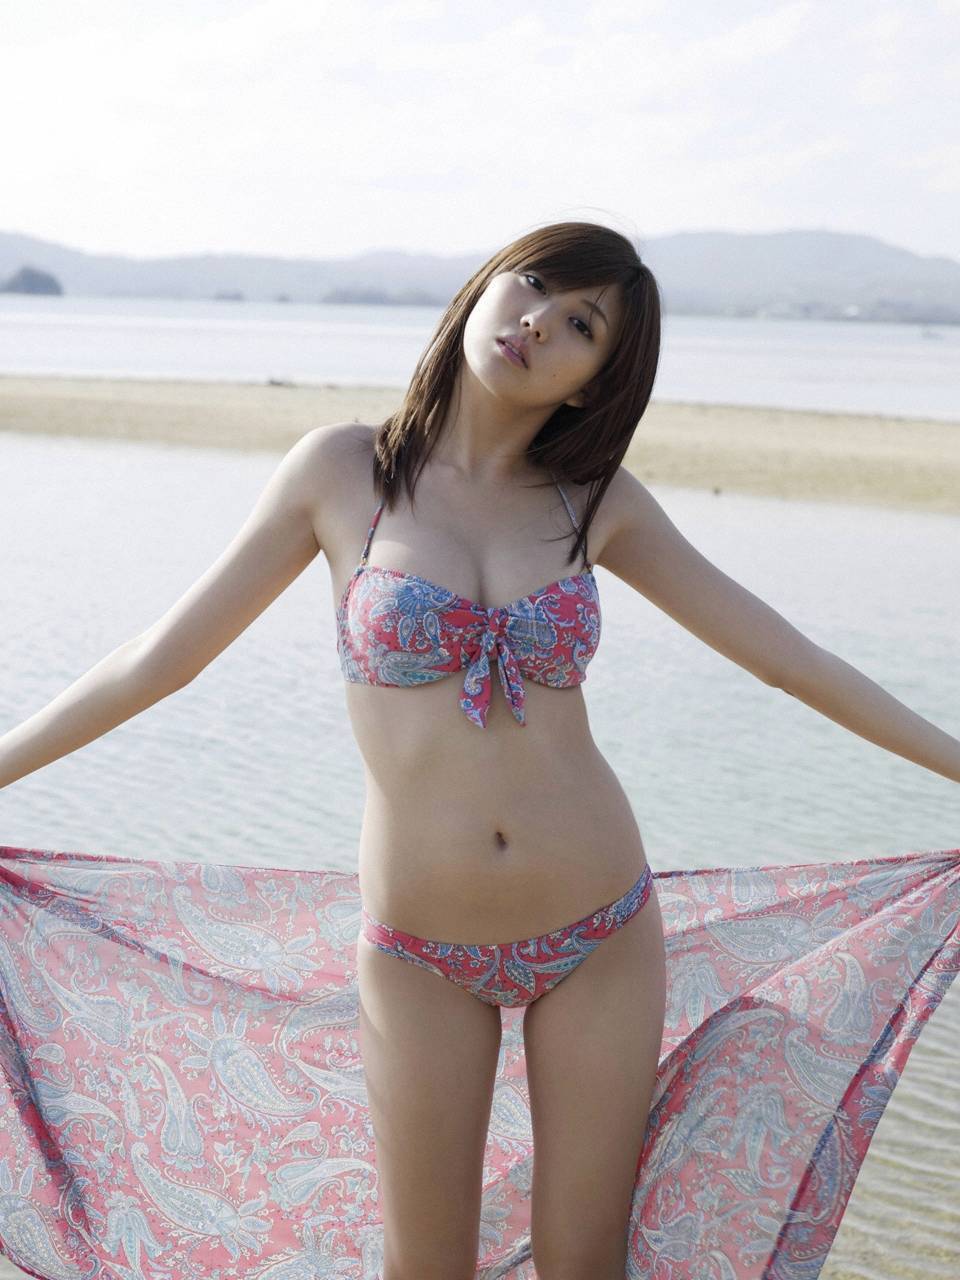 Japanese Beauty Video Site